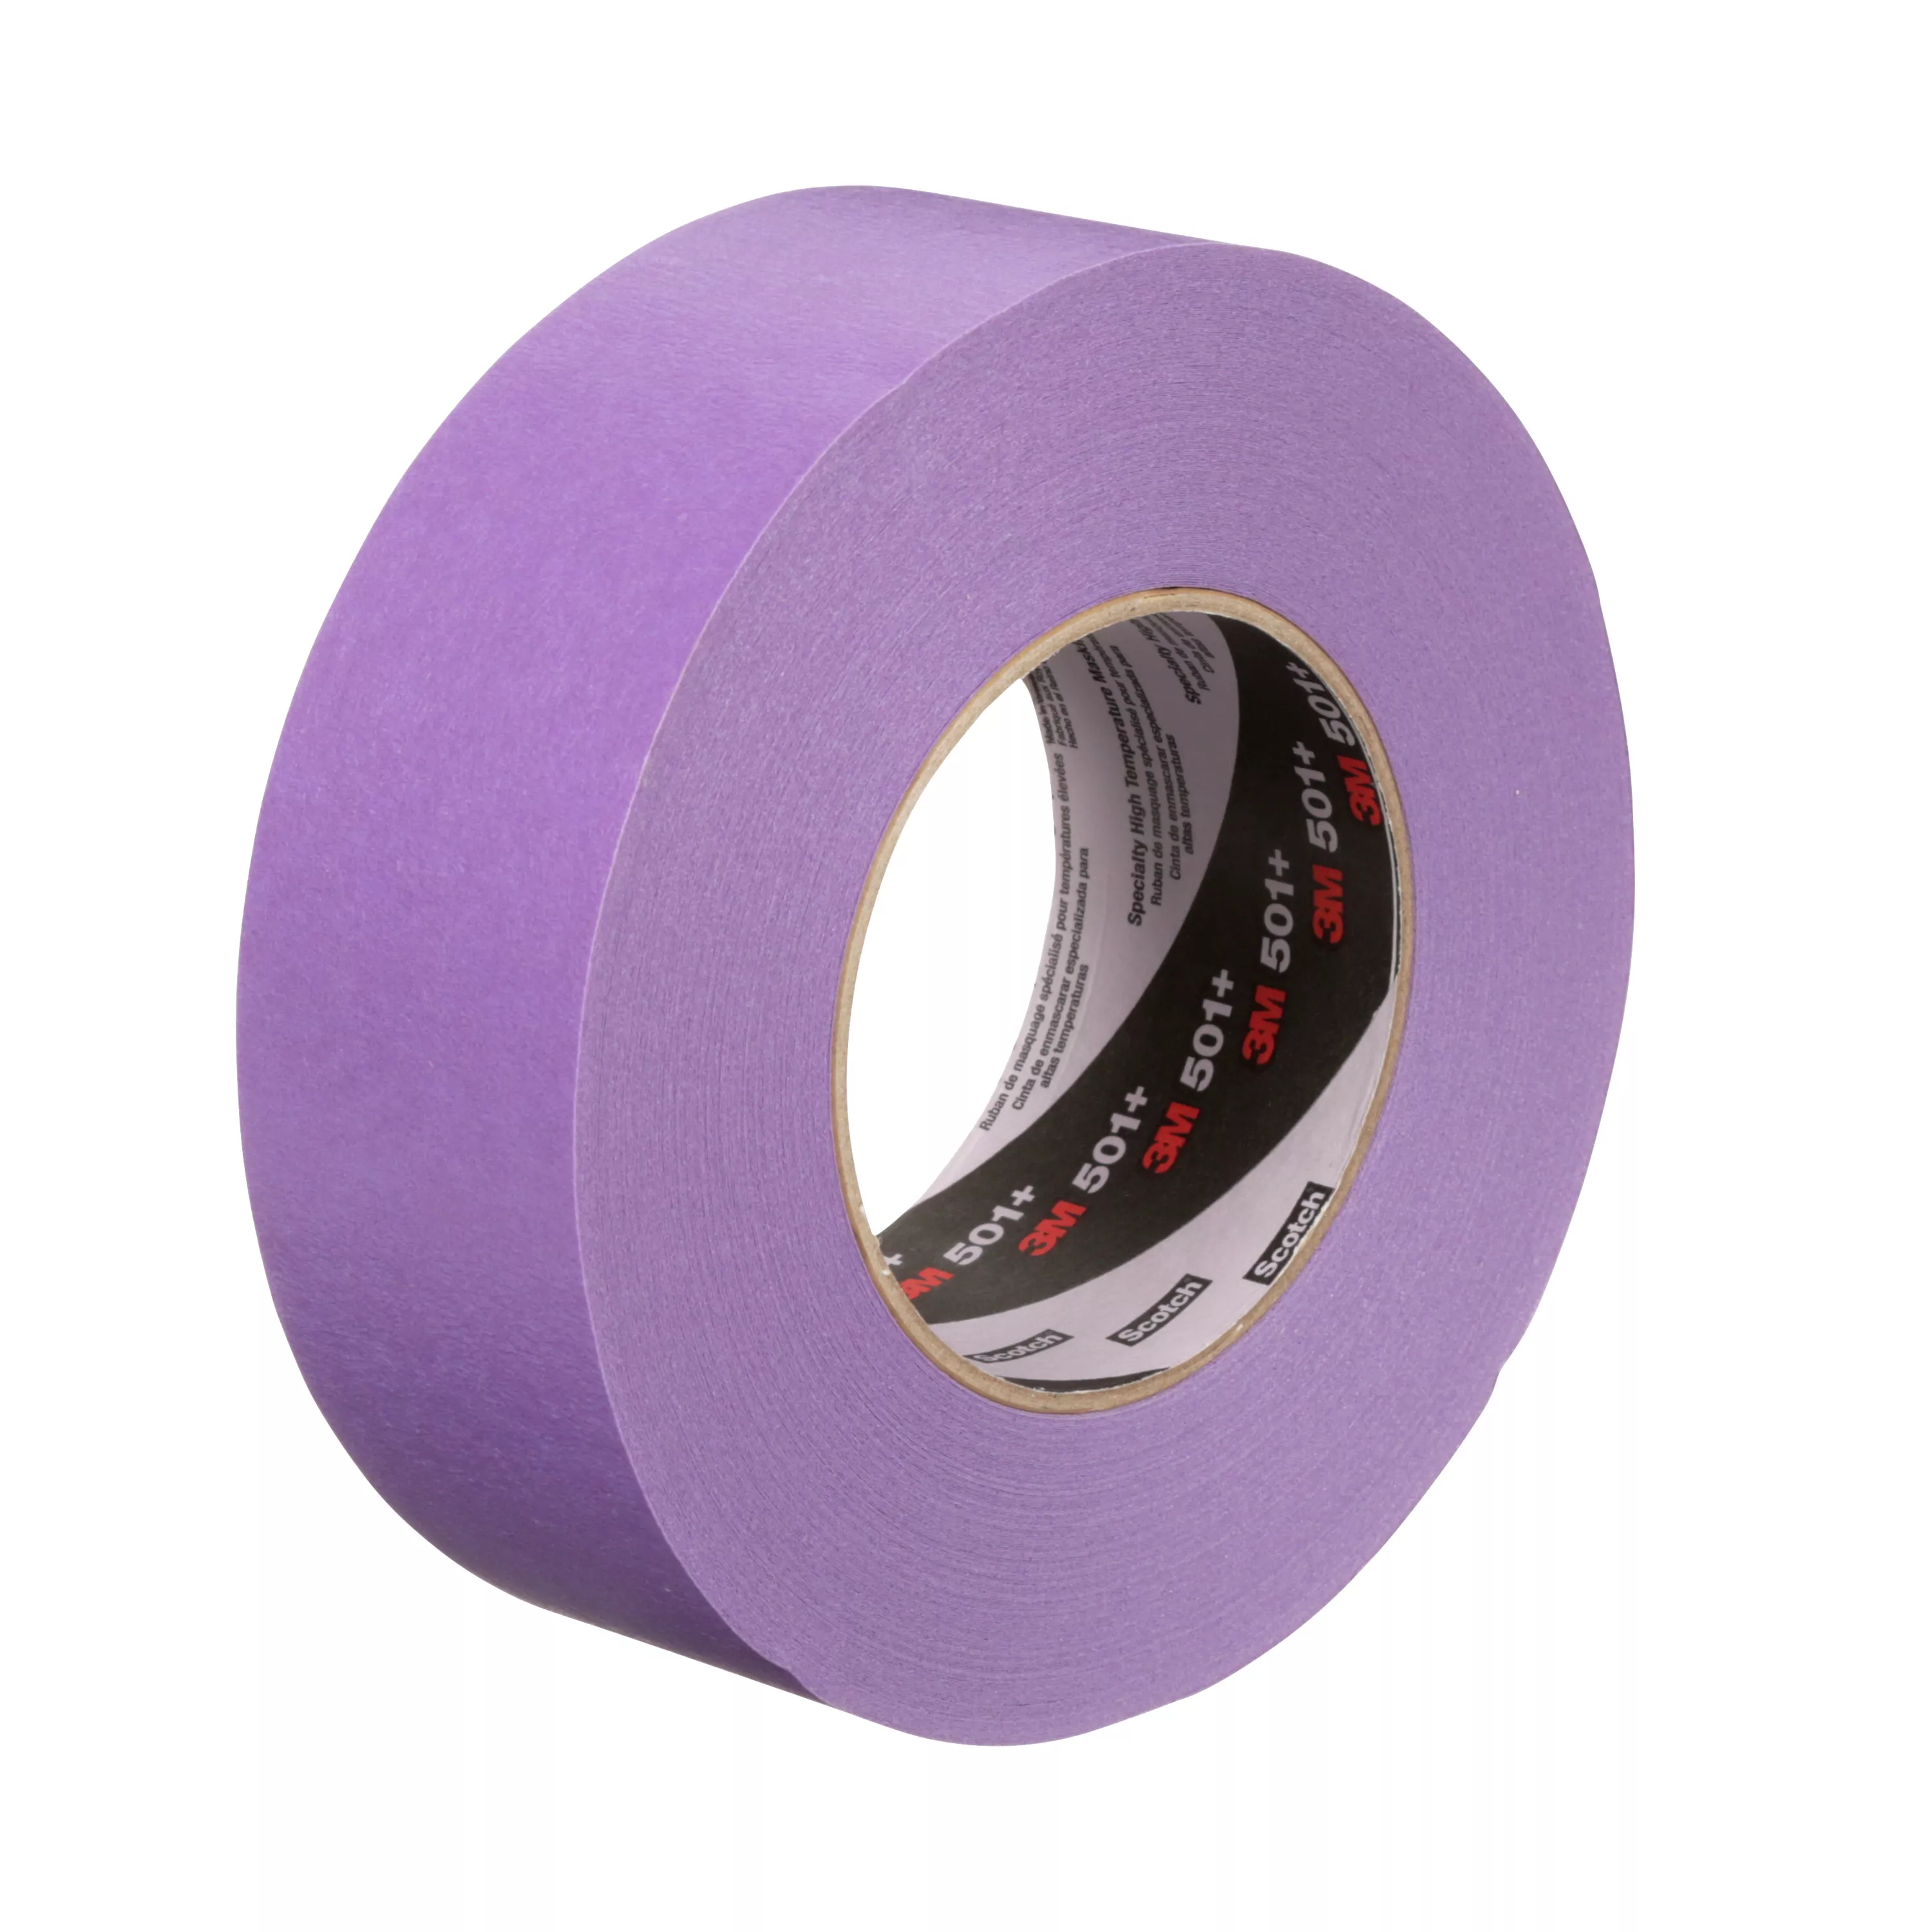 3M™ Specialty High Temperature Masking Tape 501+, Purple, 1490 mm x
3300
 m, 1 Roll/Pallet